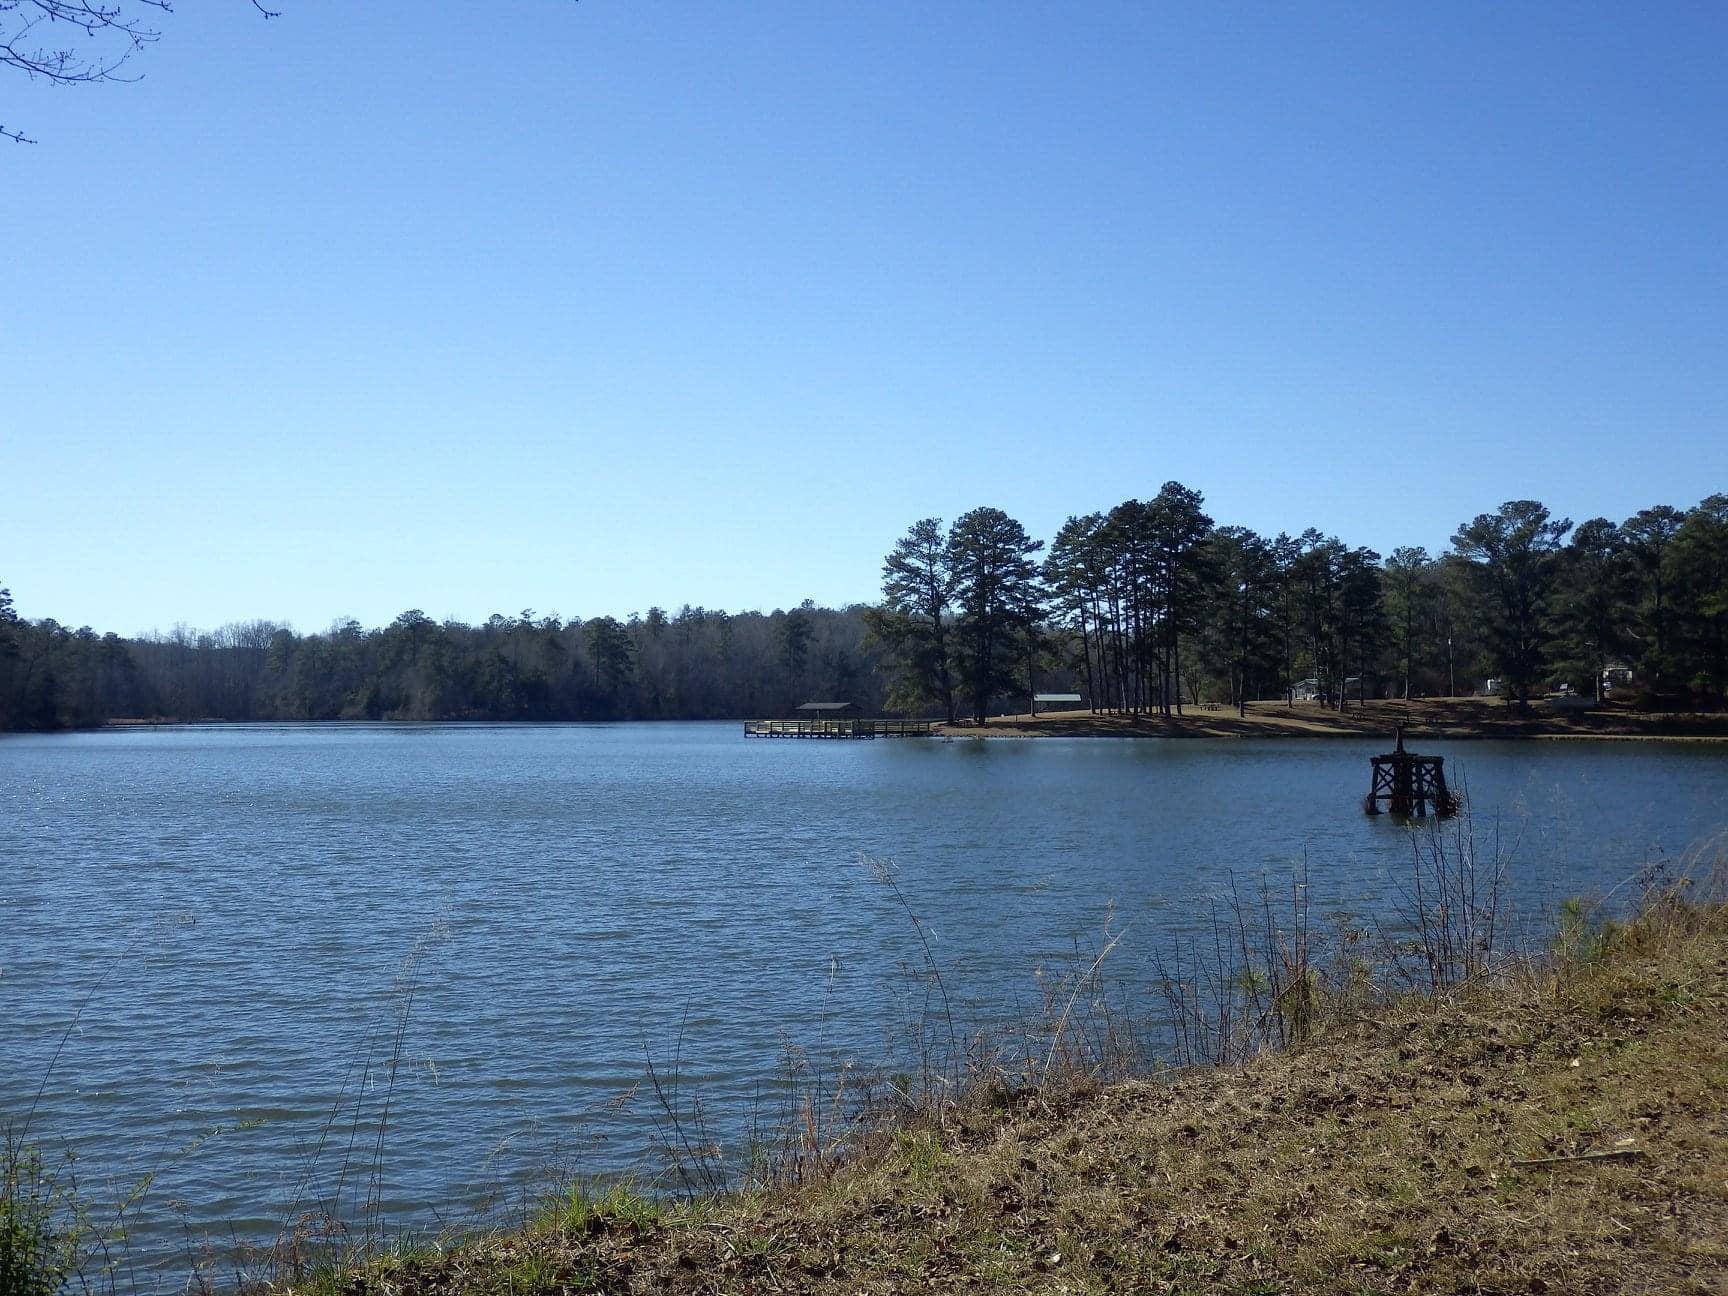 Clay County Public Fishing Lake Reopens September 2